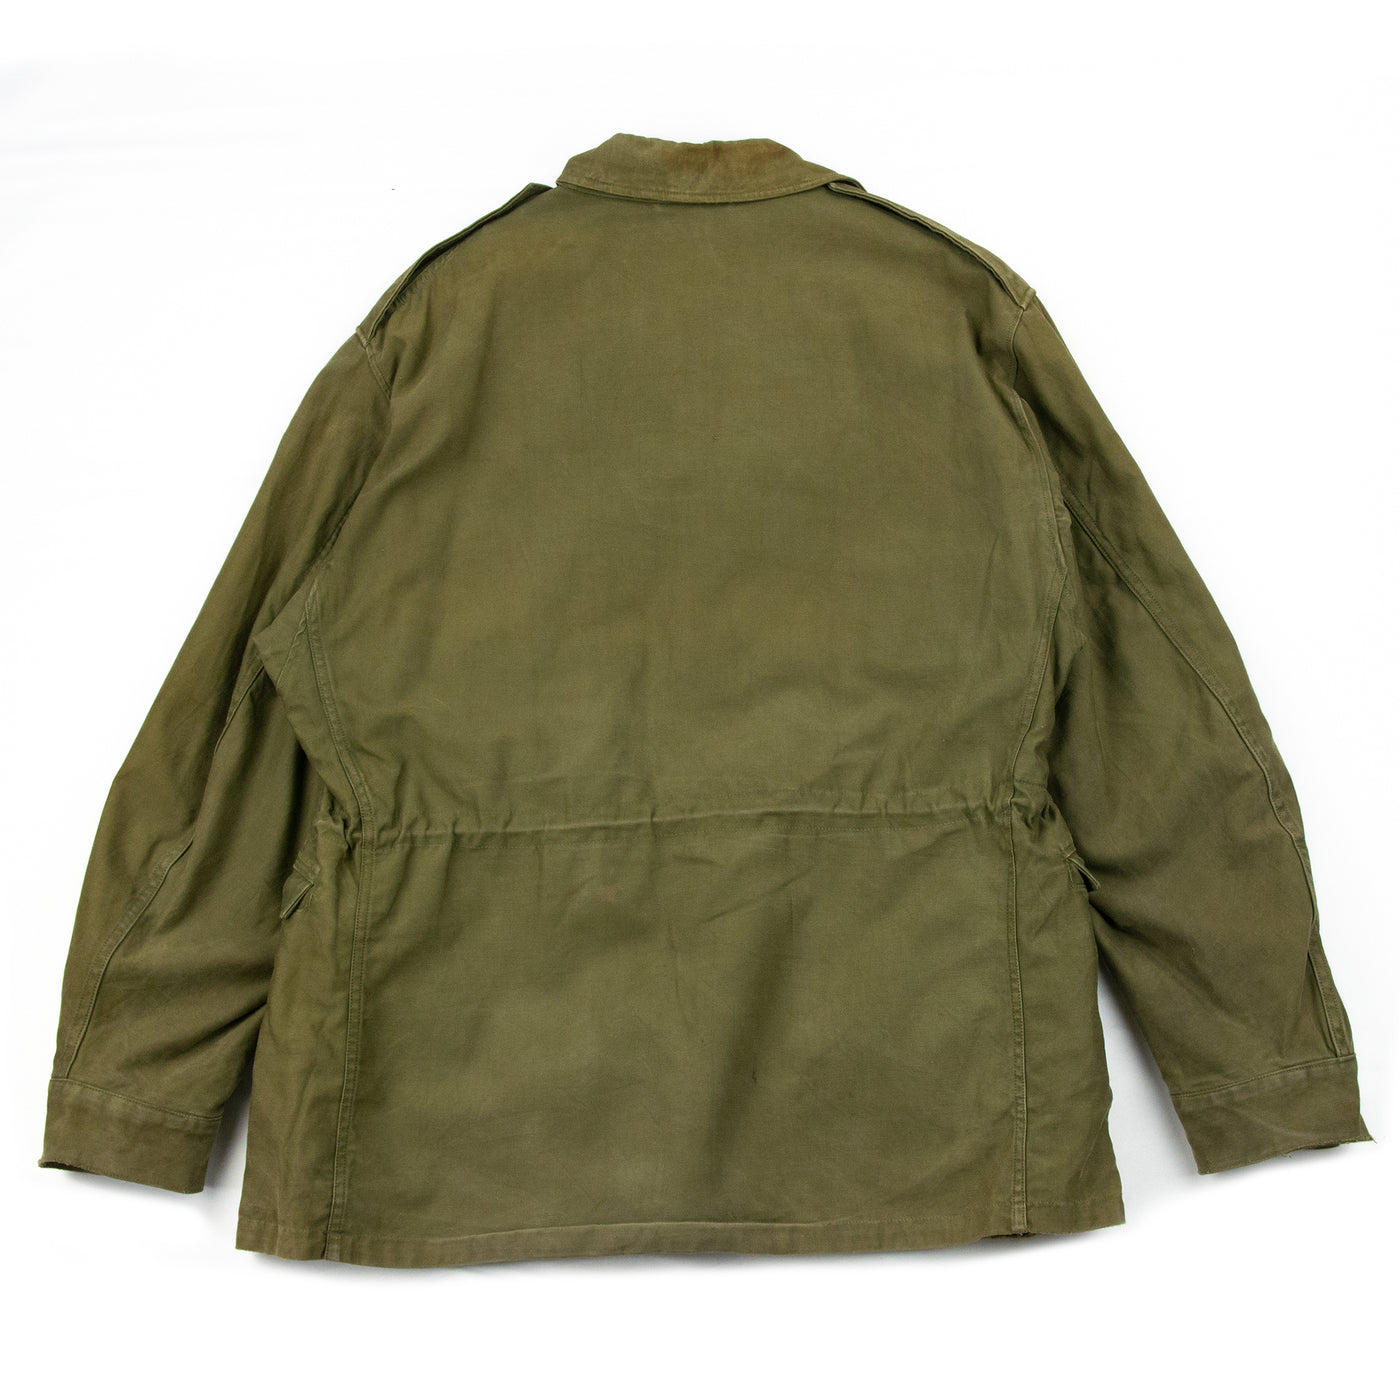 Vintage 1940s M-1943 US Army WWII Military Field Jacket Olive Green - M Back